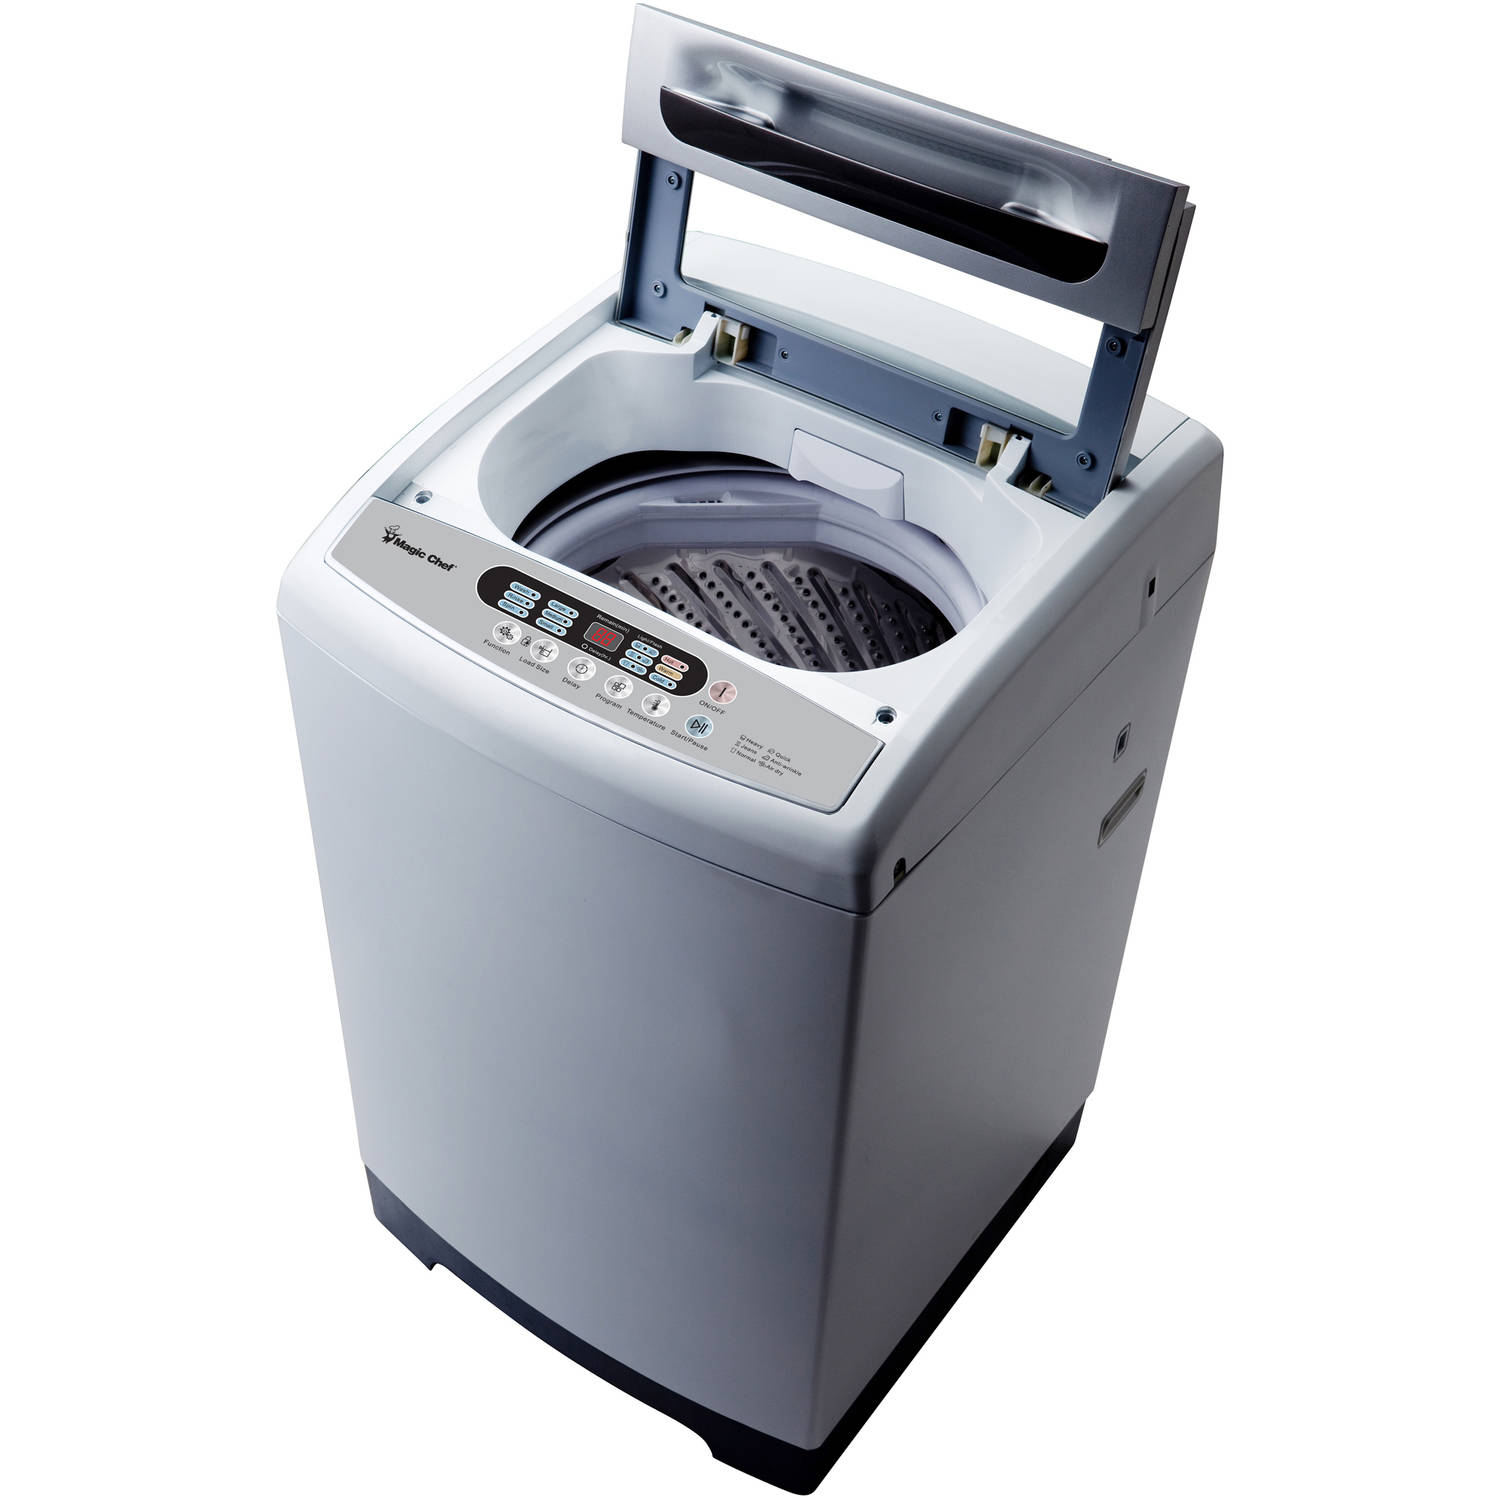 Magic Chef 2.1 cu ft Topload Compact Washer, White - image 2 of 18